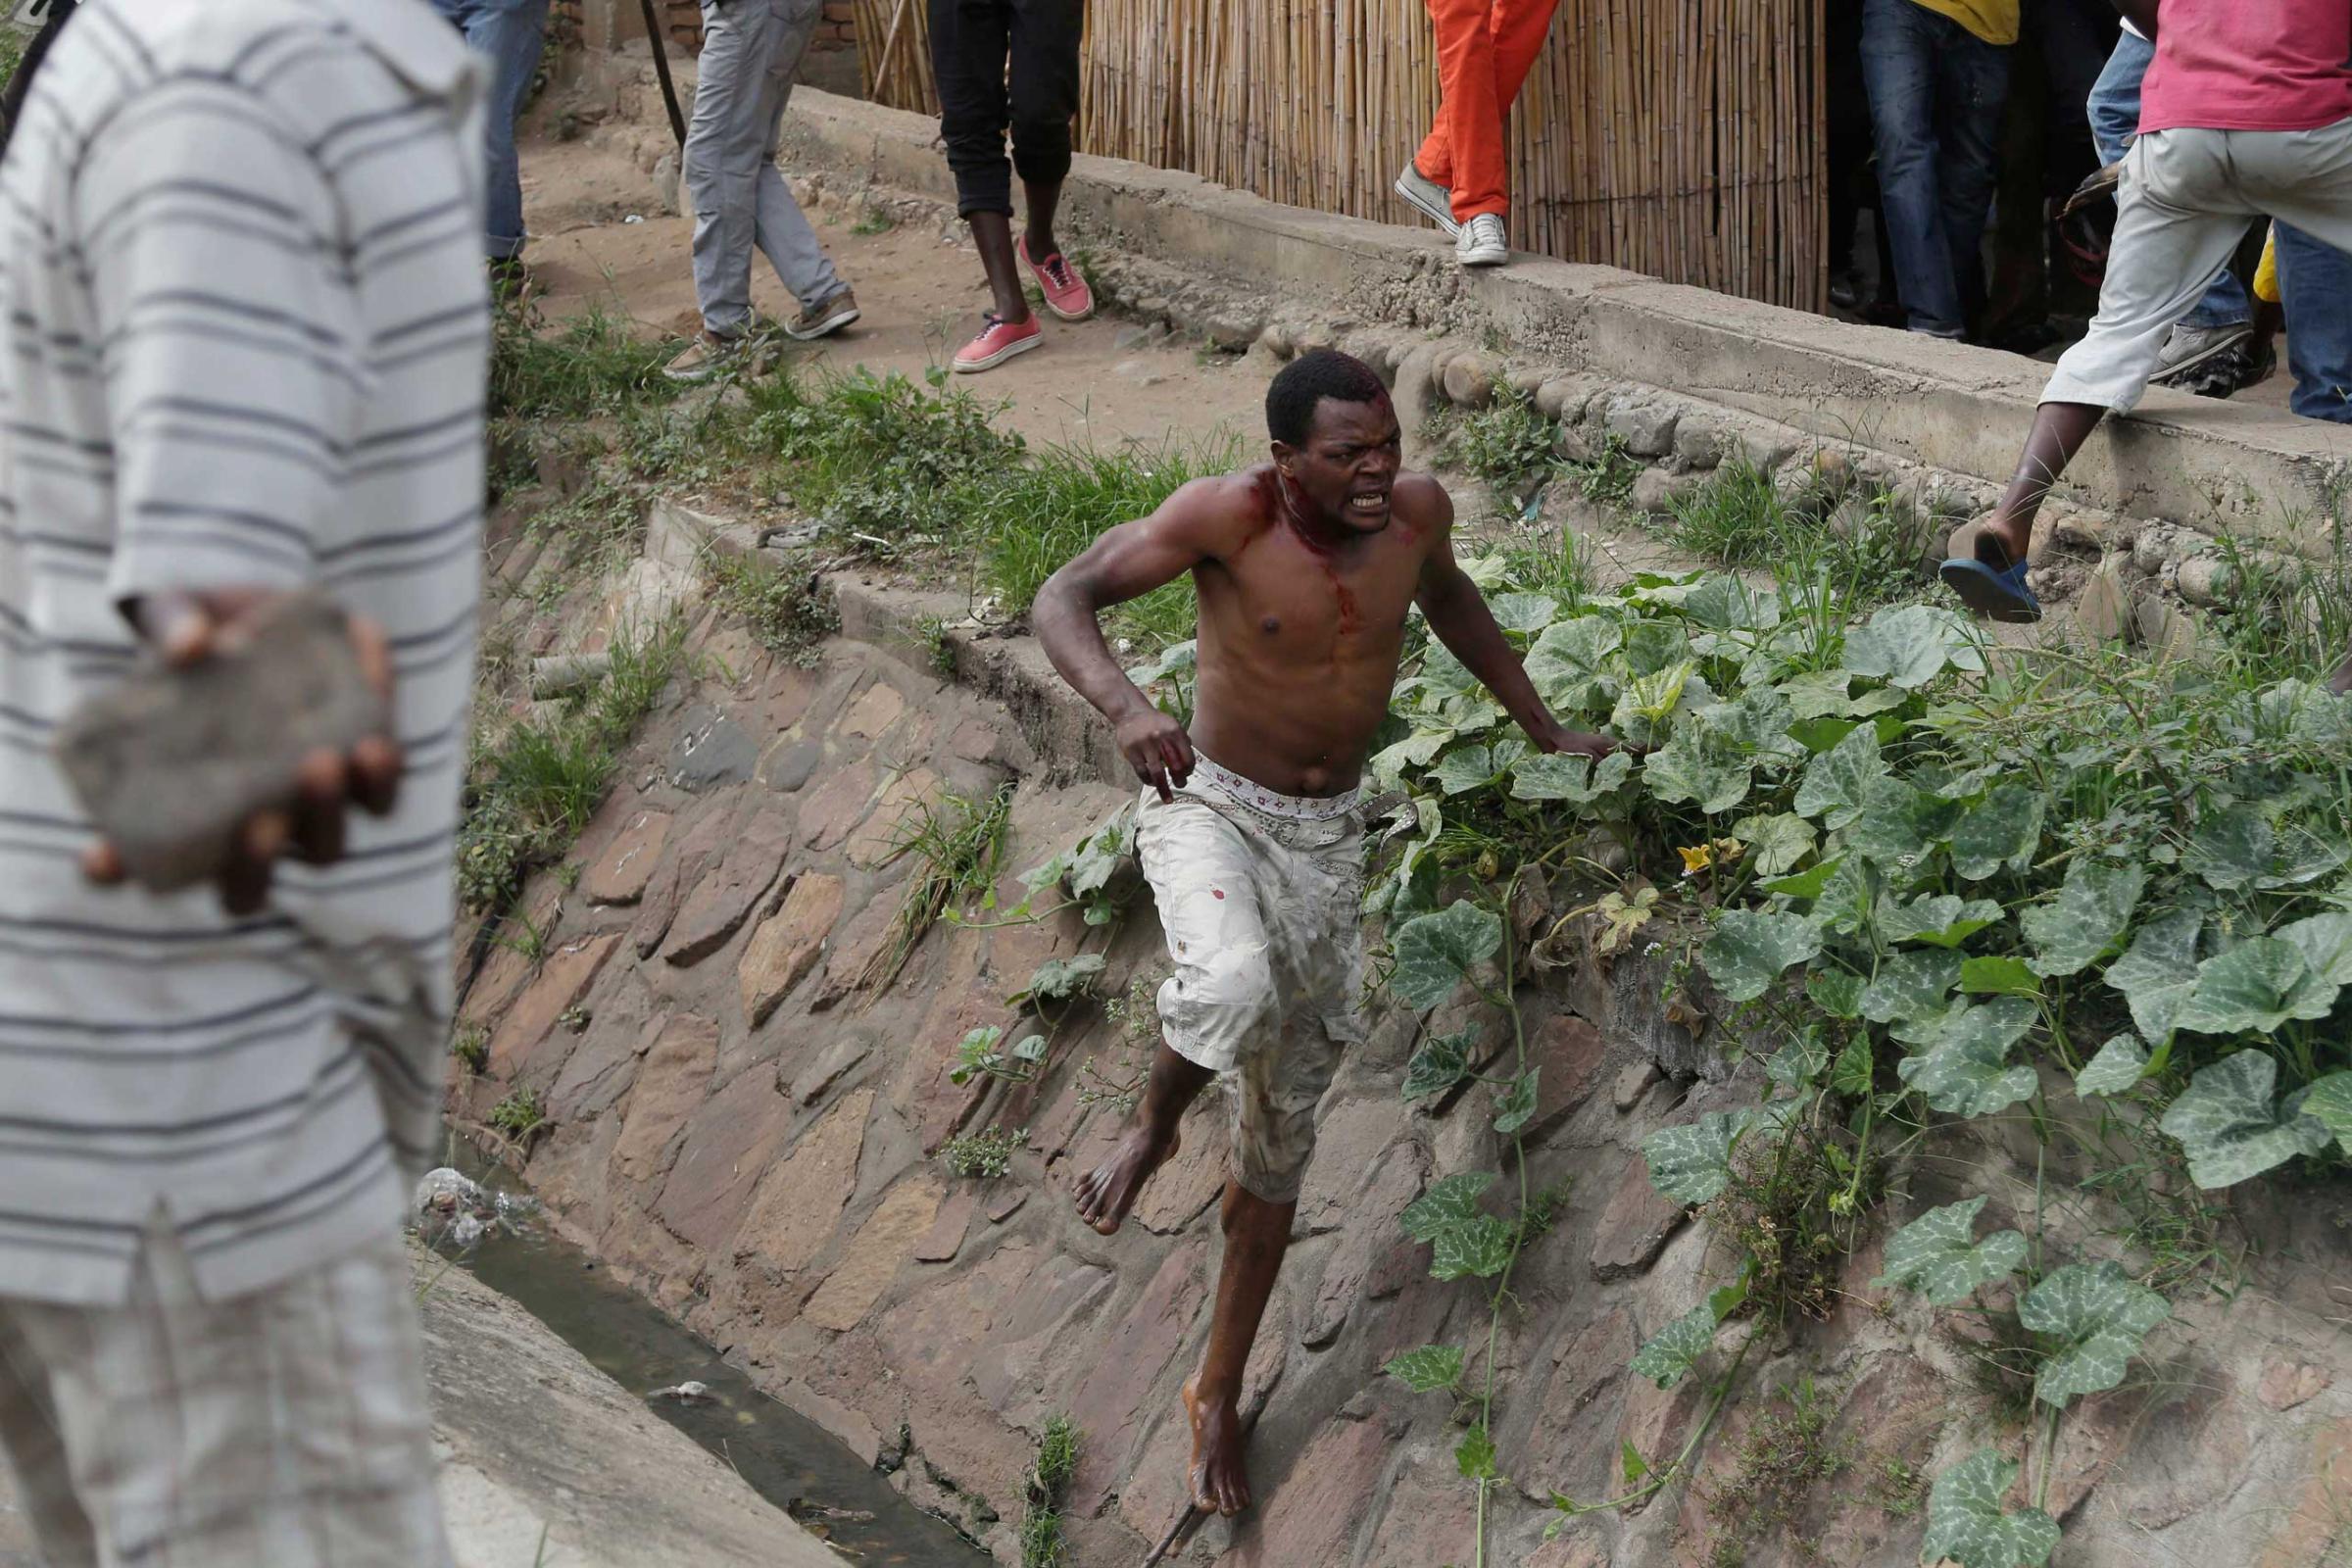 Niyonzima flees from his house into a sewer under a hail of stones thrown by a mob.